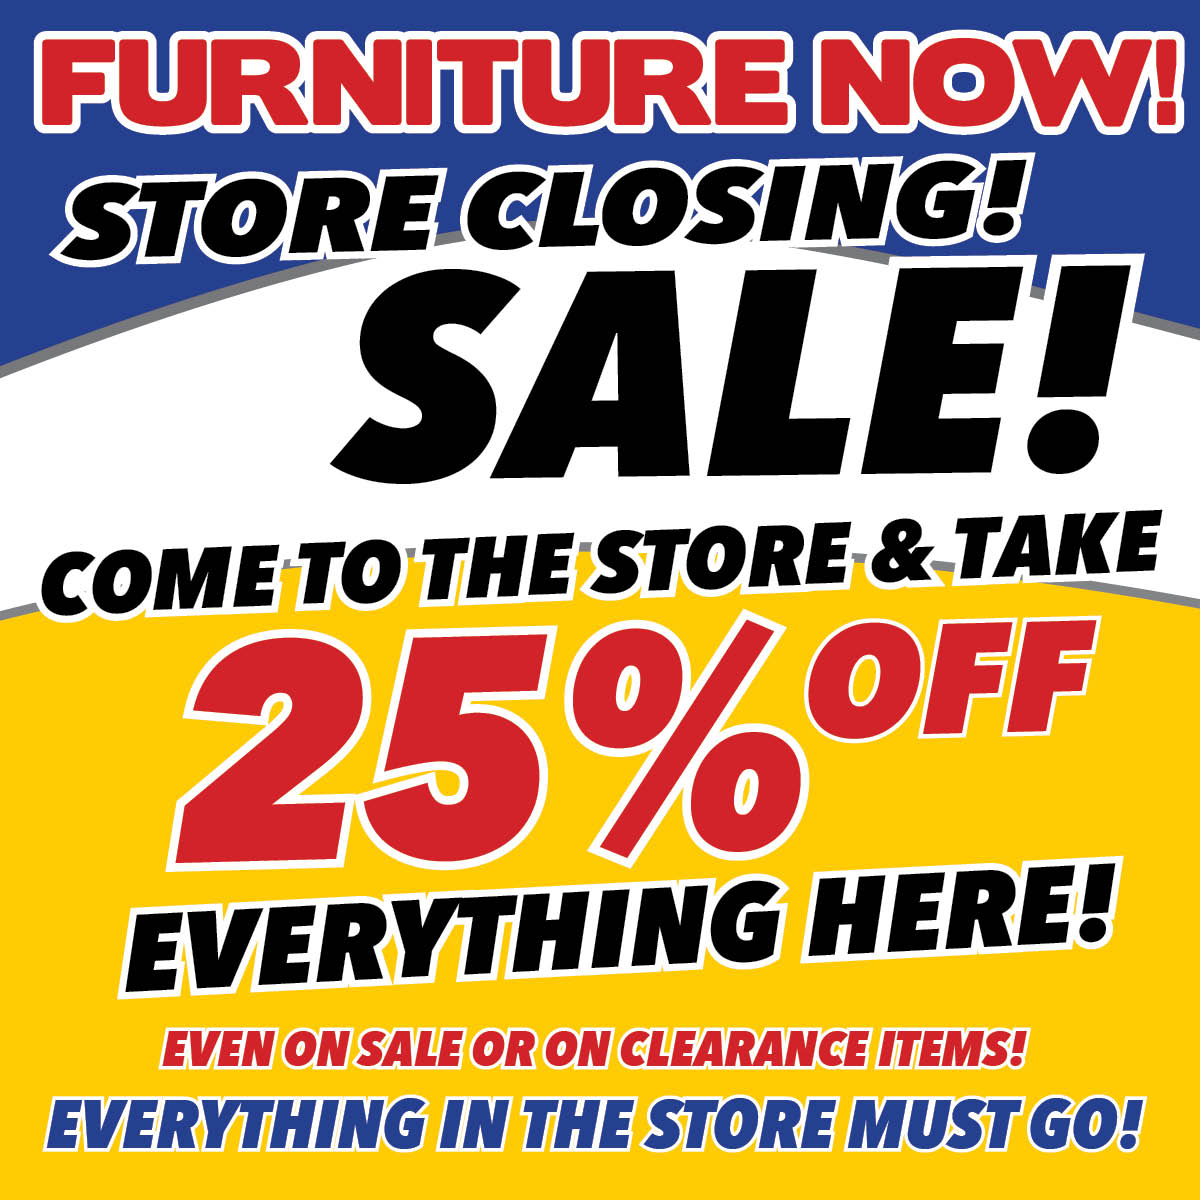 Store closing 25 off - the 4th